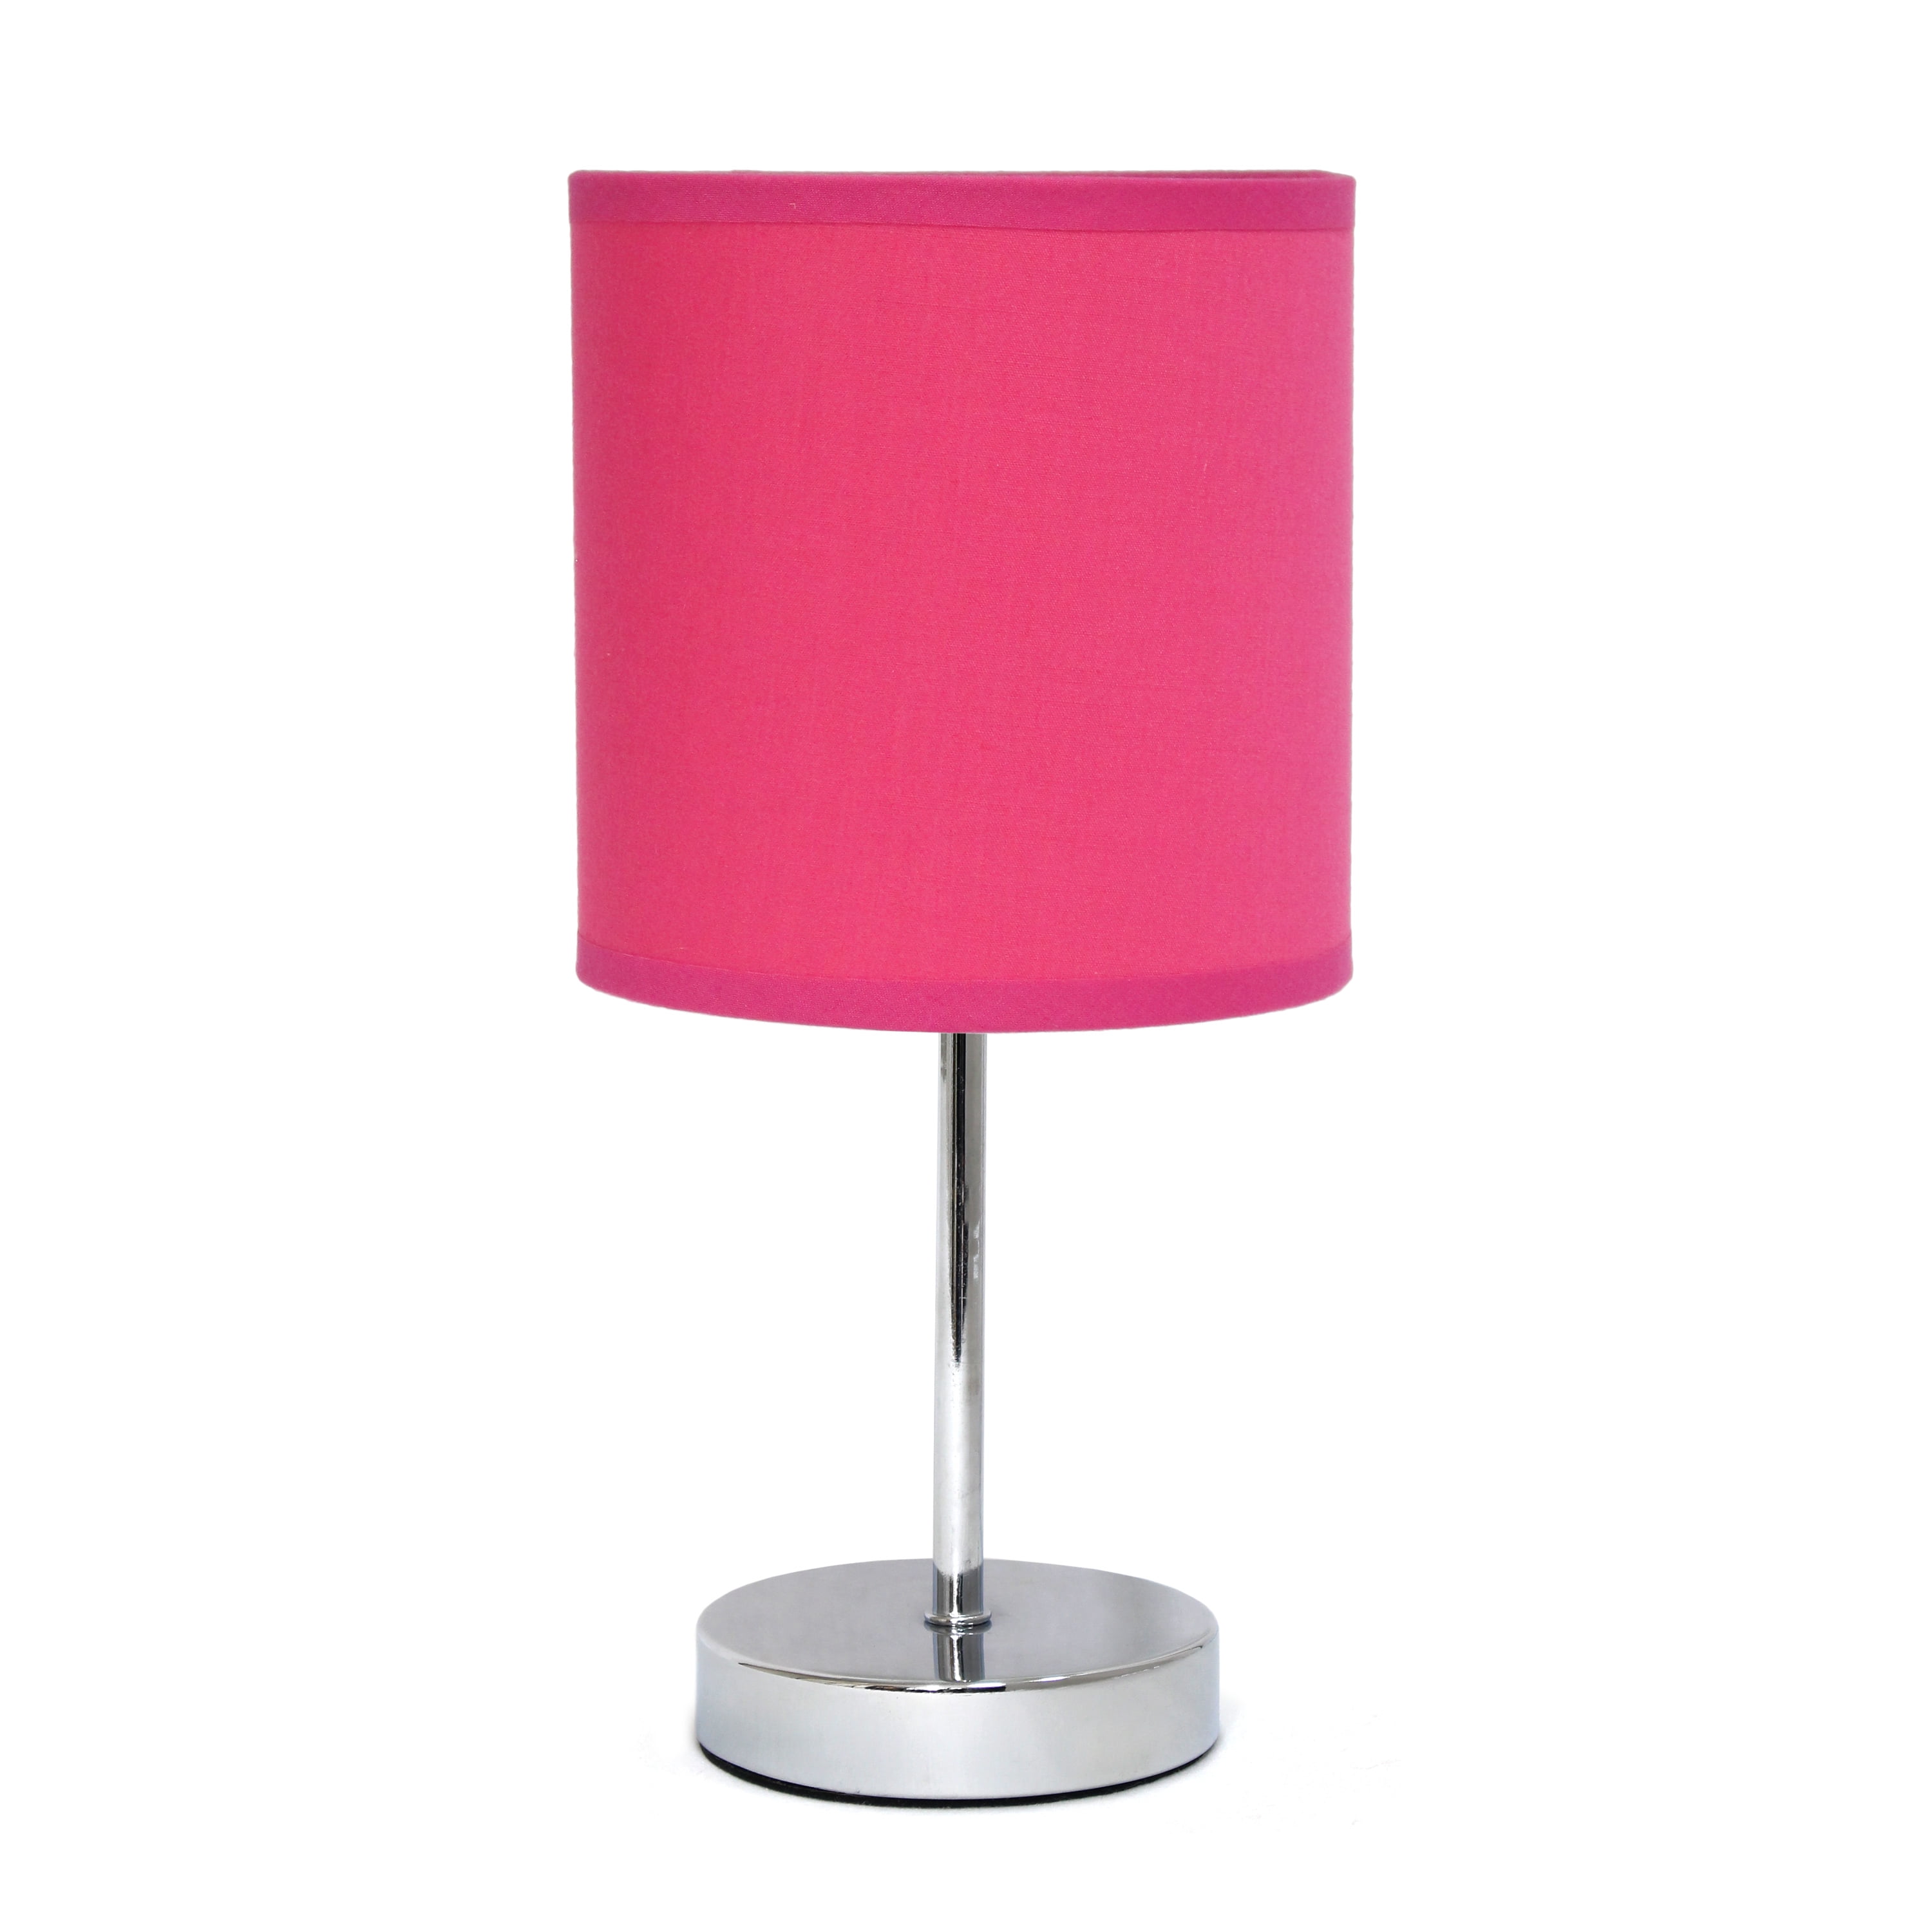 Lt2007-hpk Chrome Mini Basic Table Lamp With Fabric Shade, Hot Pink